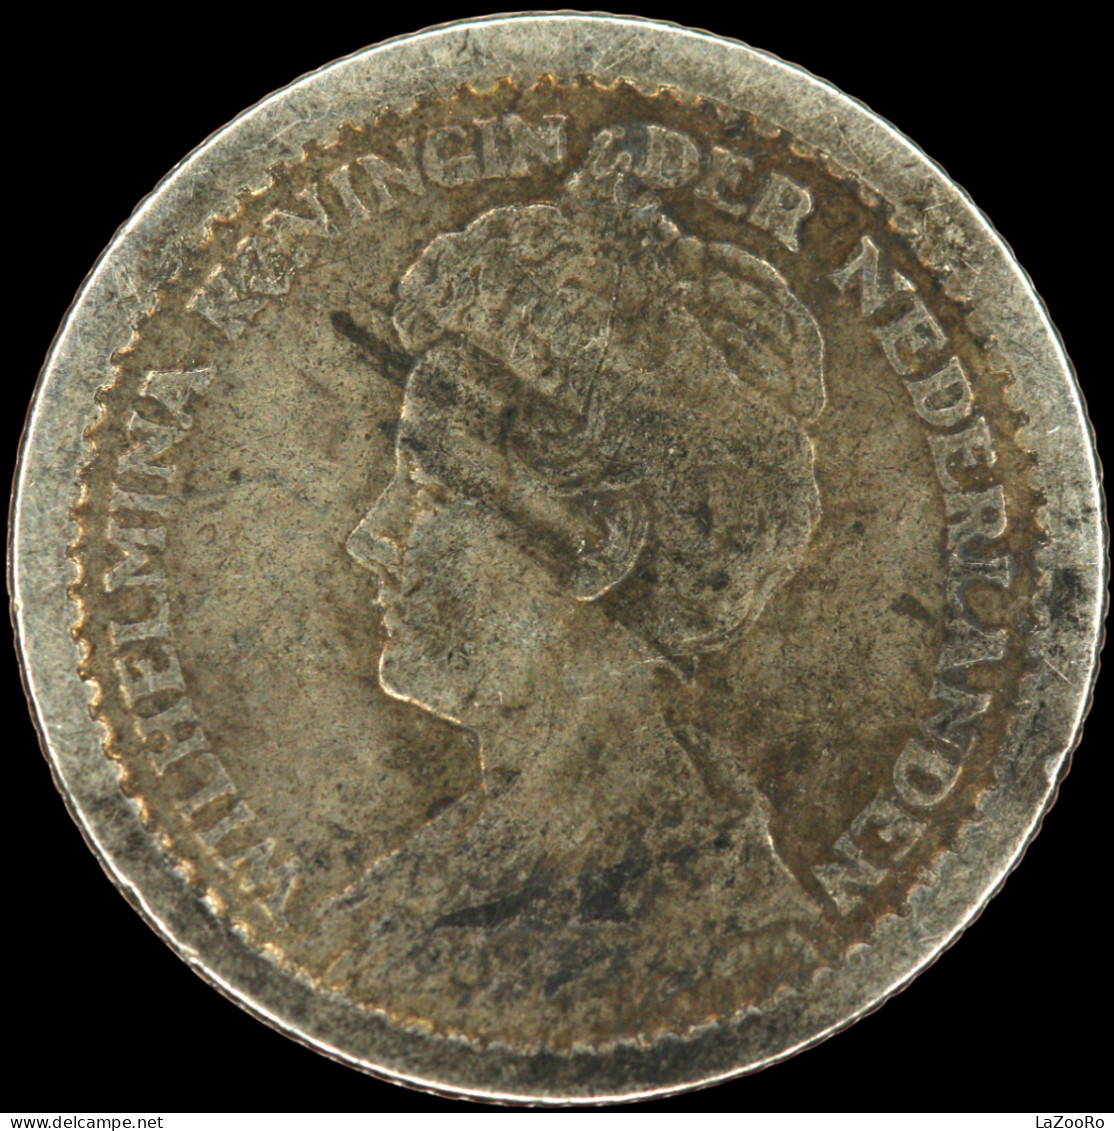 LaZooRo: Netherlands 10 Cents 1914 VF - Silver - 10 Cent